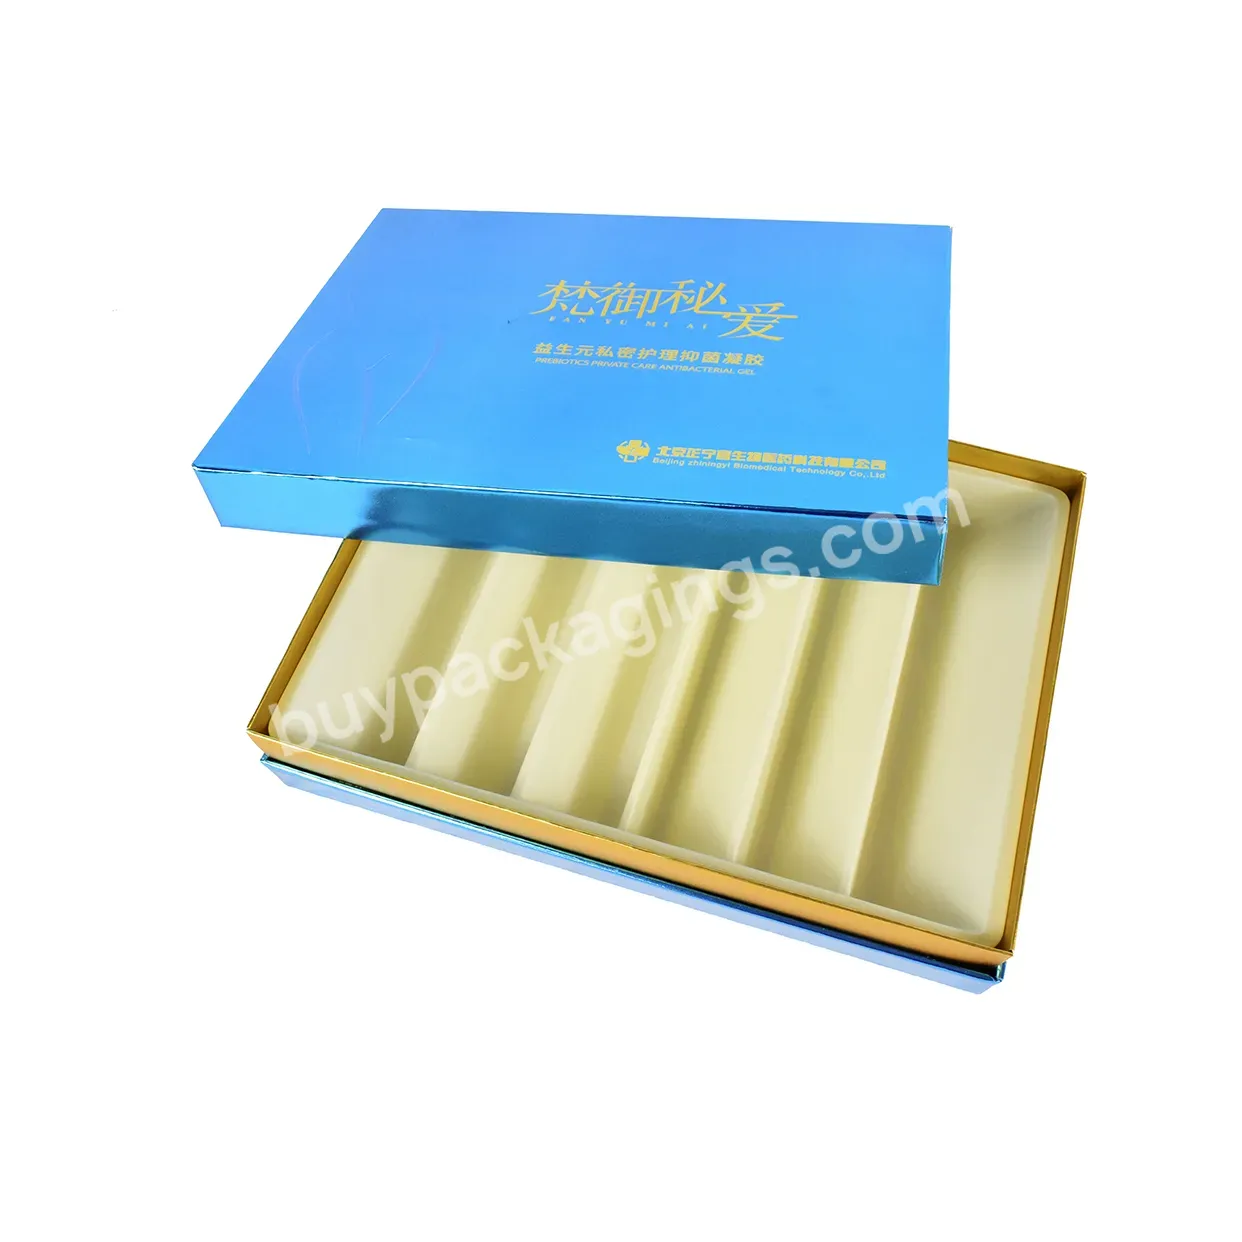 Customized Magnetic Closure Lid Packaging Present Perfume Essential Oil Cosmetics Gift Box With Eva Foam Inserthot Sale Products